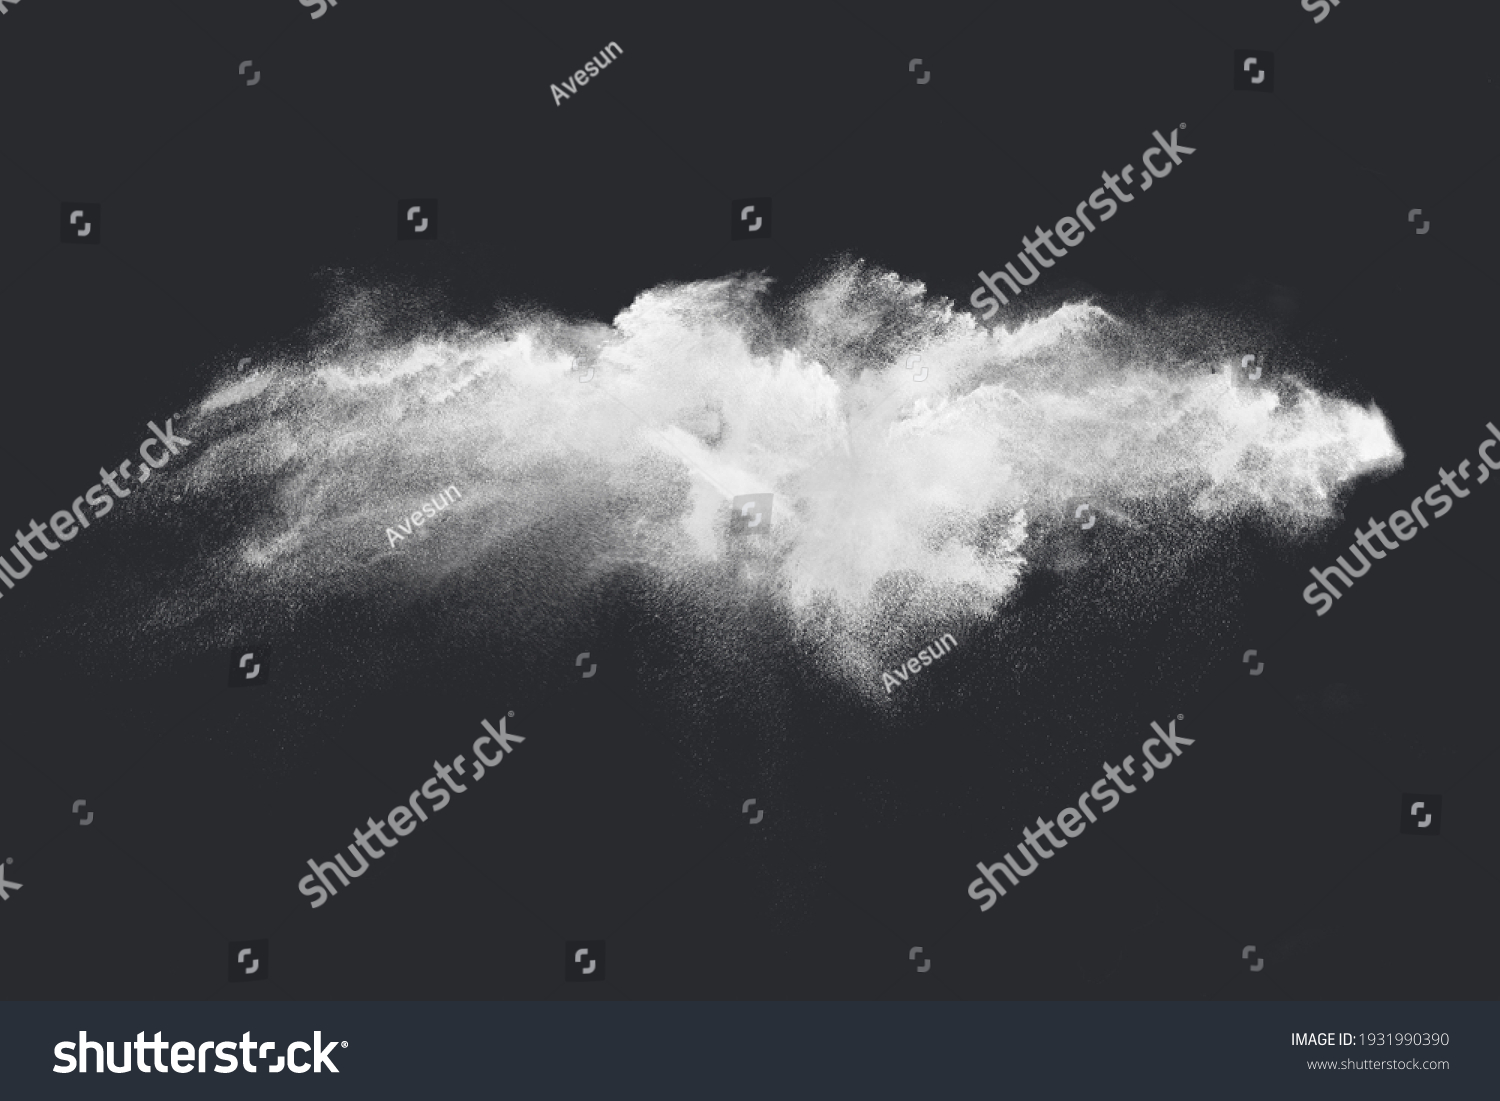 Abstract design of white powder snow cloud explosion on dark background #1931990390